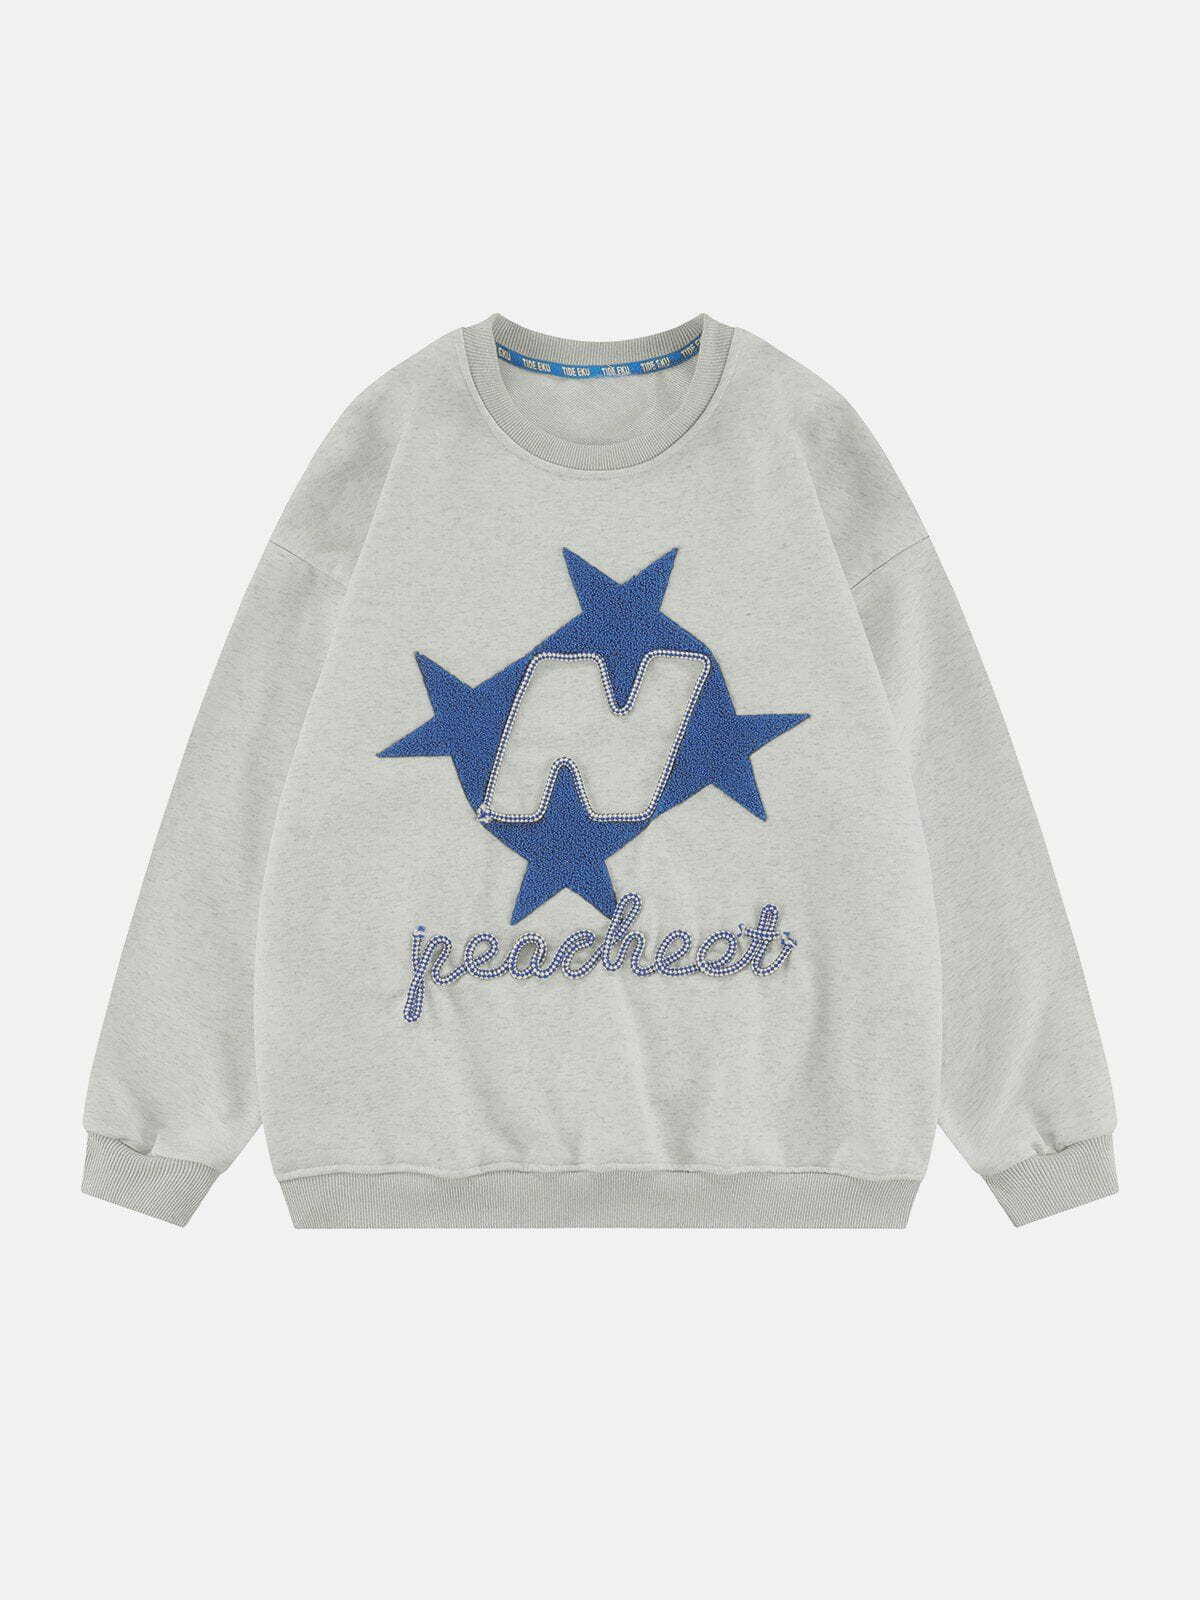 embroidered star sweatshirt quirky & y2k chic 8494